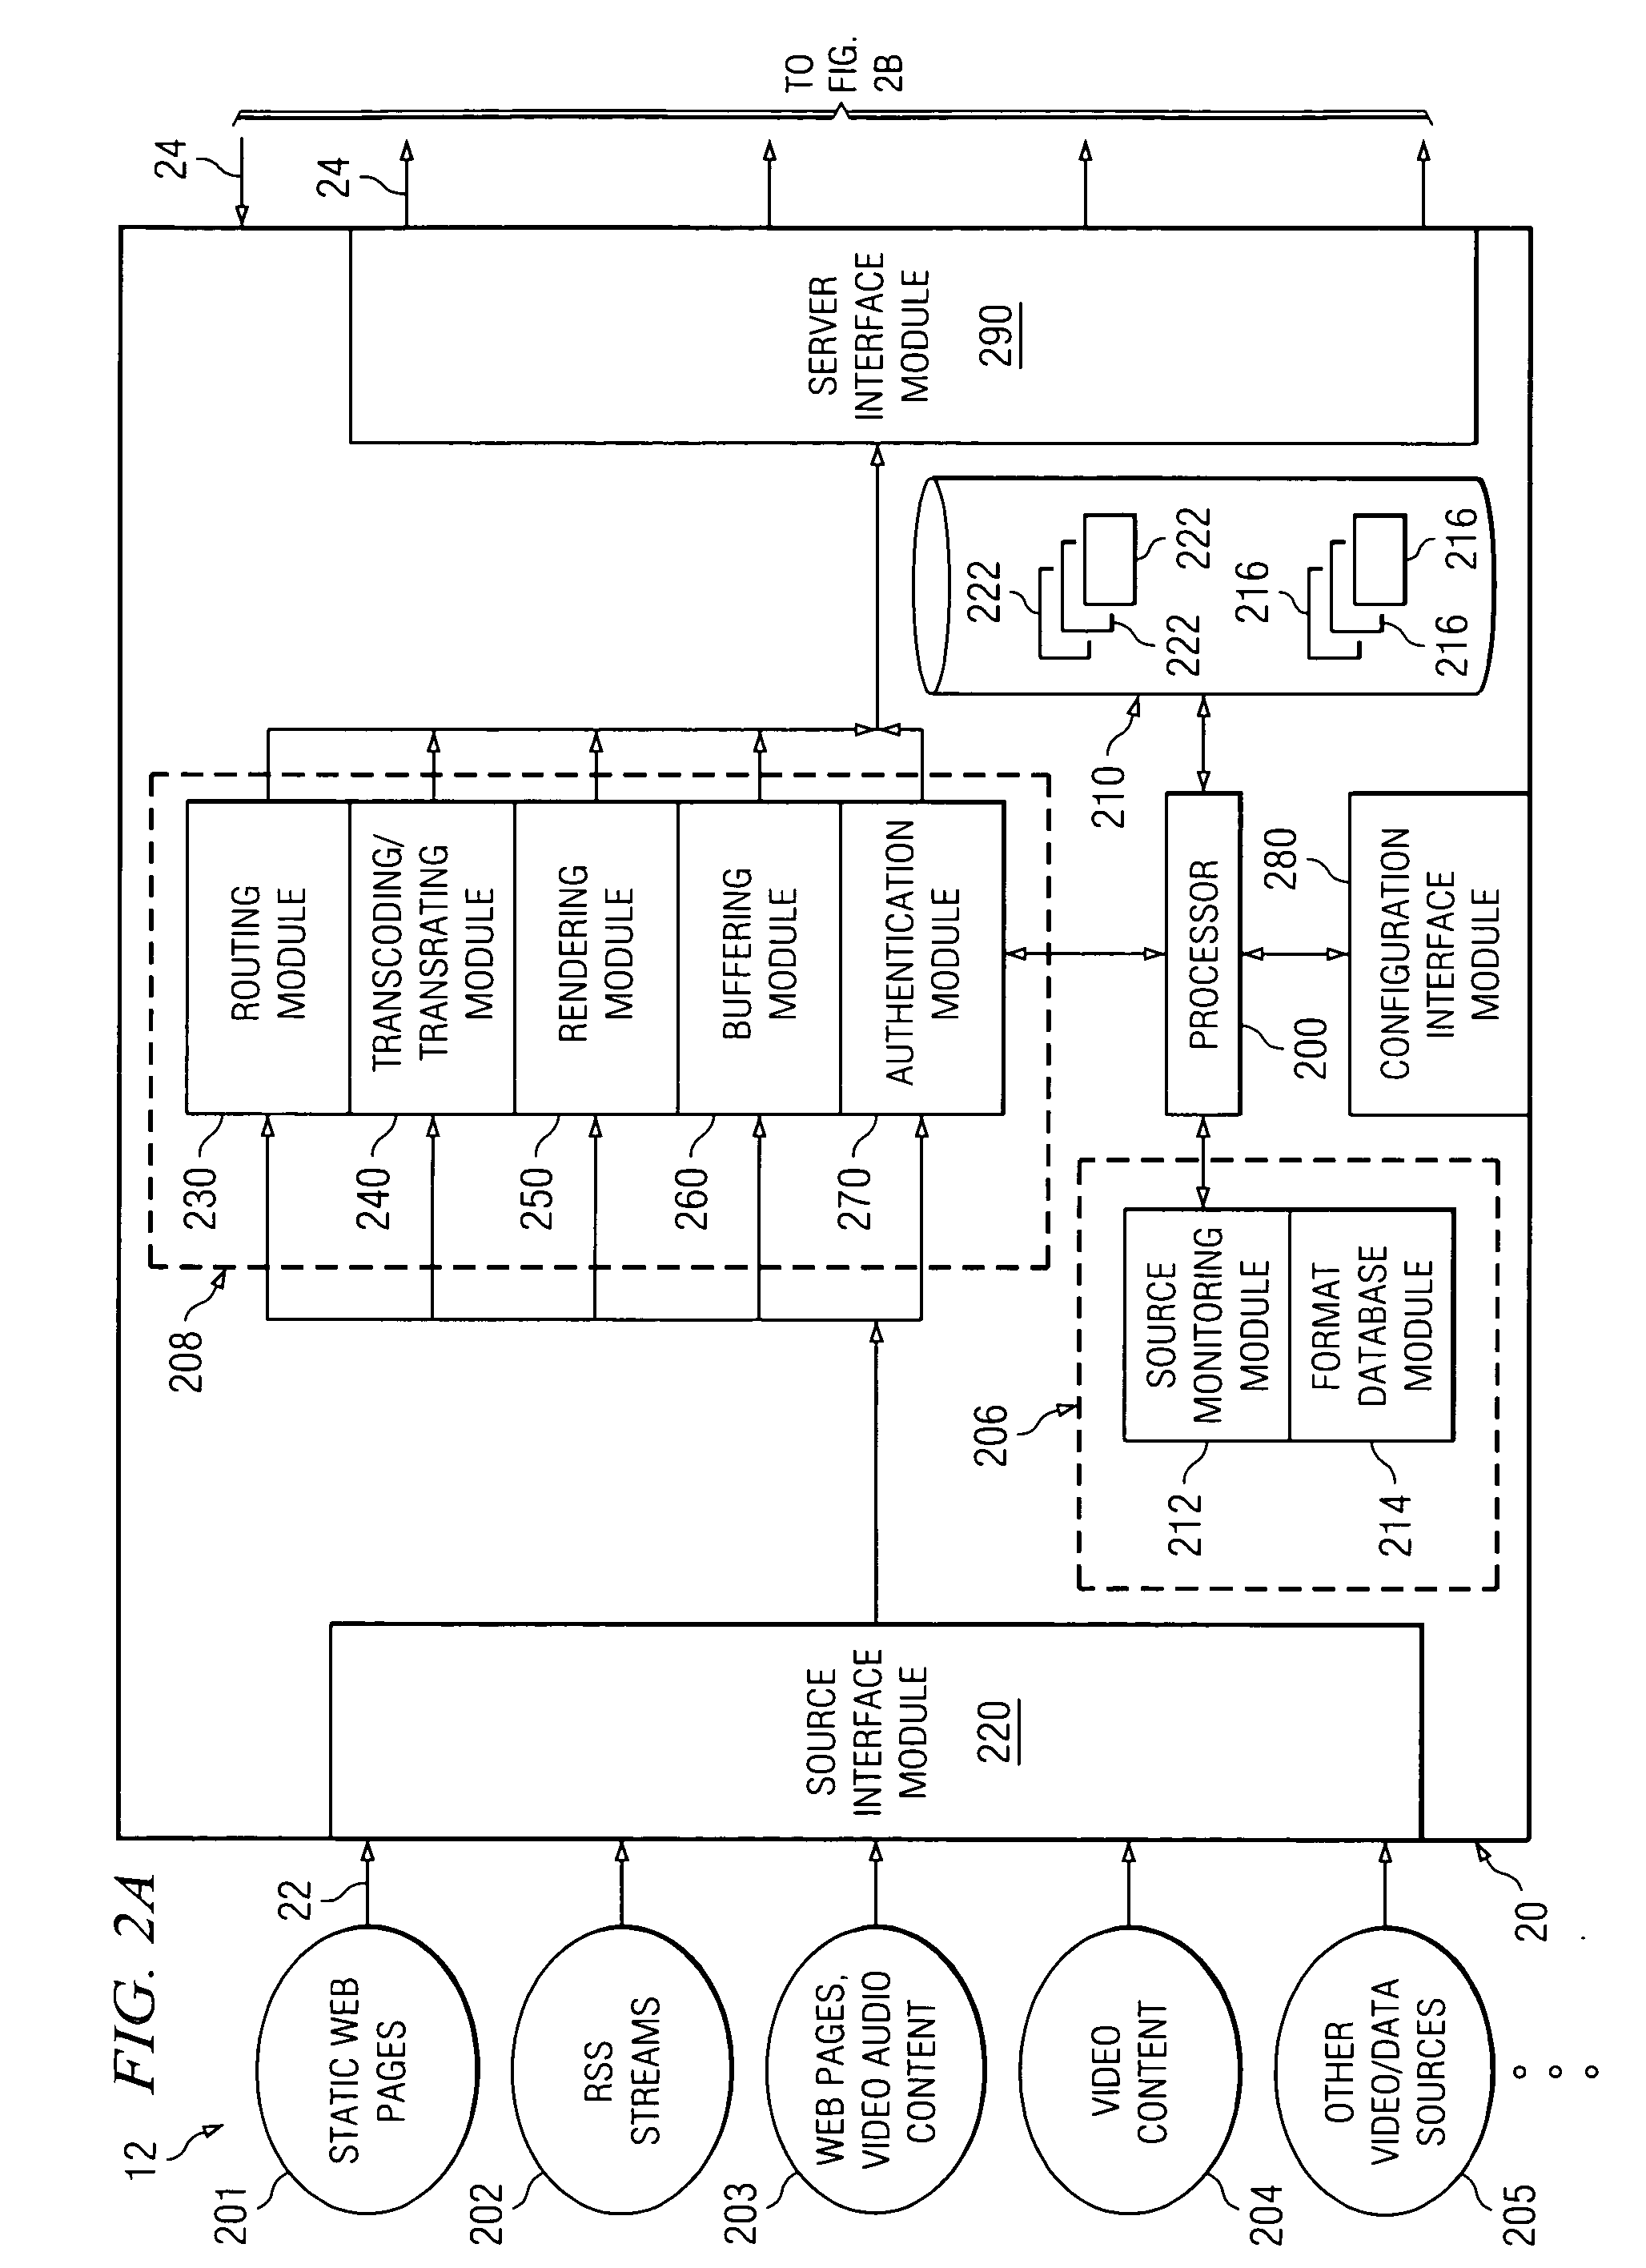 System and method for routing content